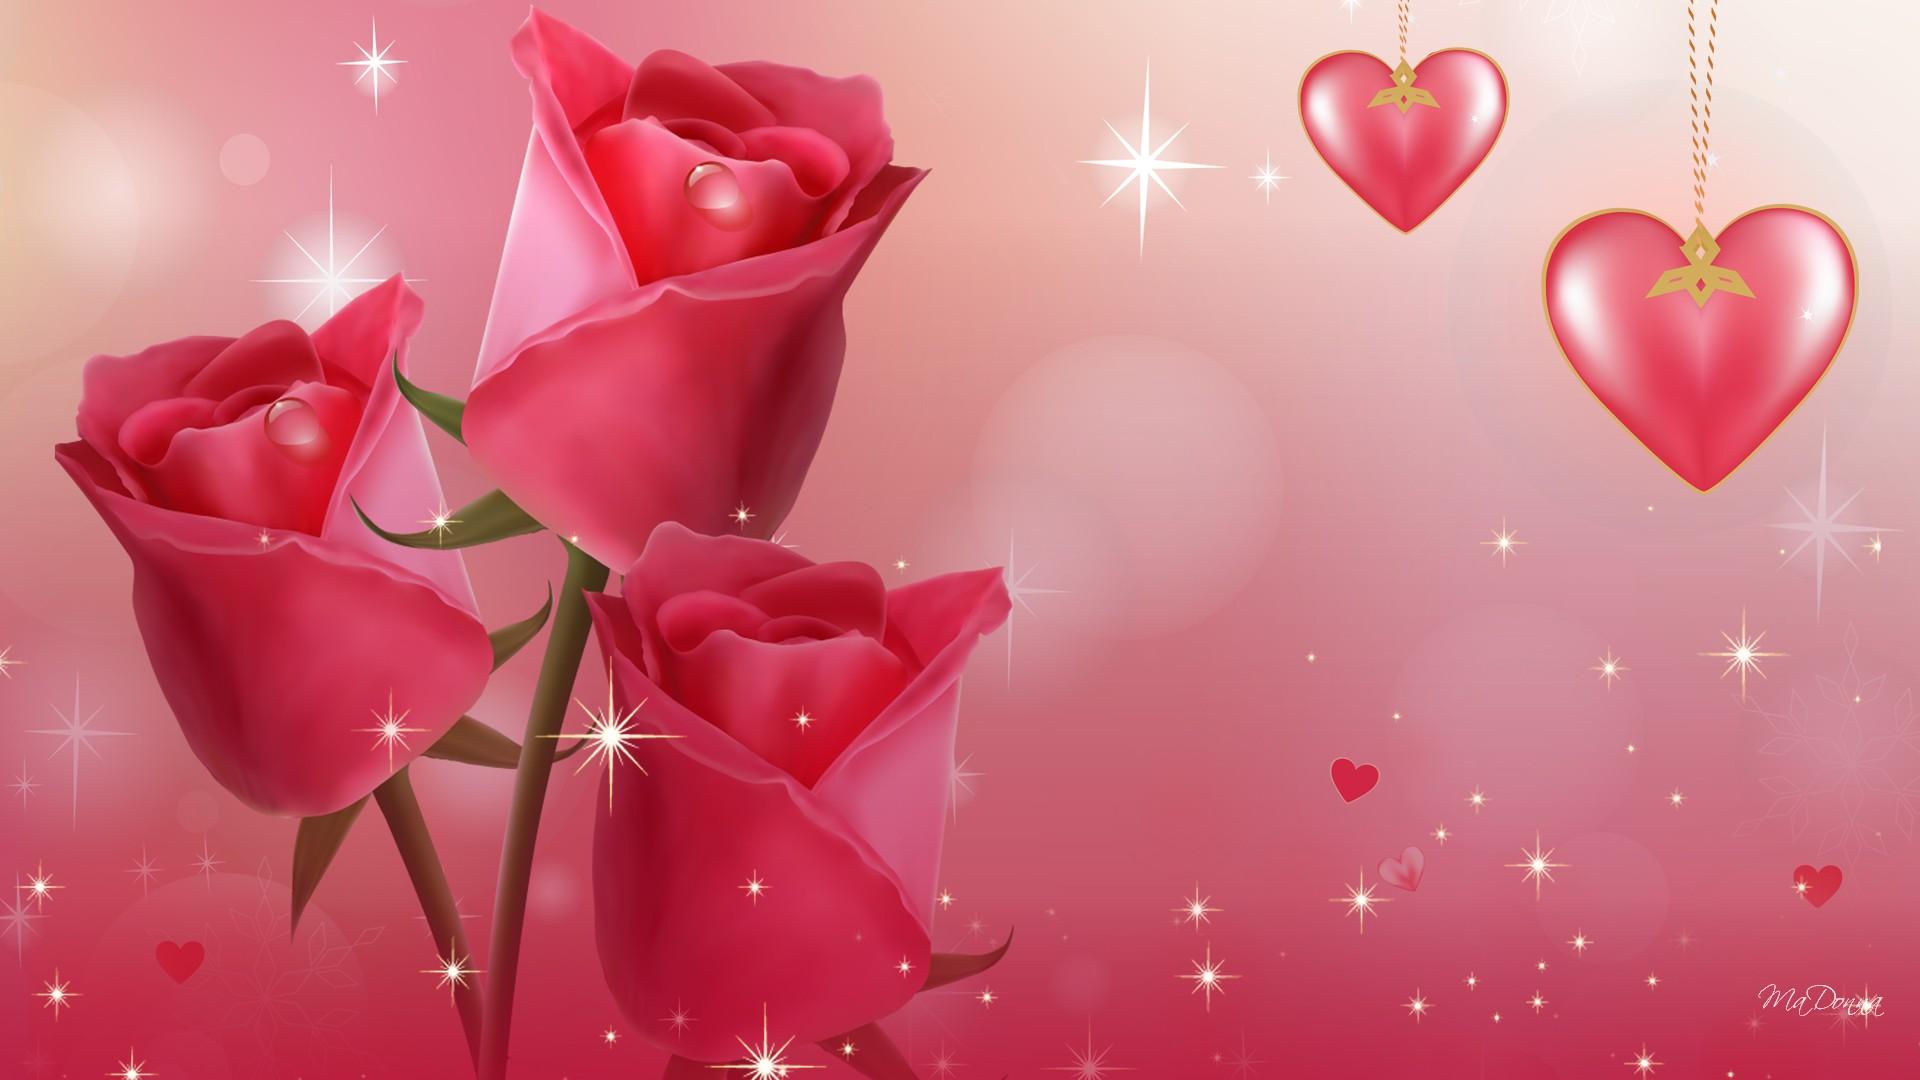 Most Beautiful Love Wallpaper HD Pictures Live Hq